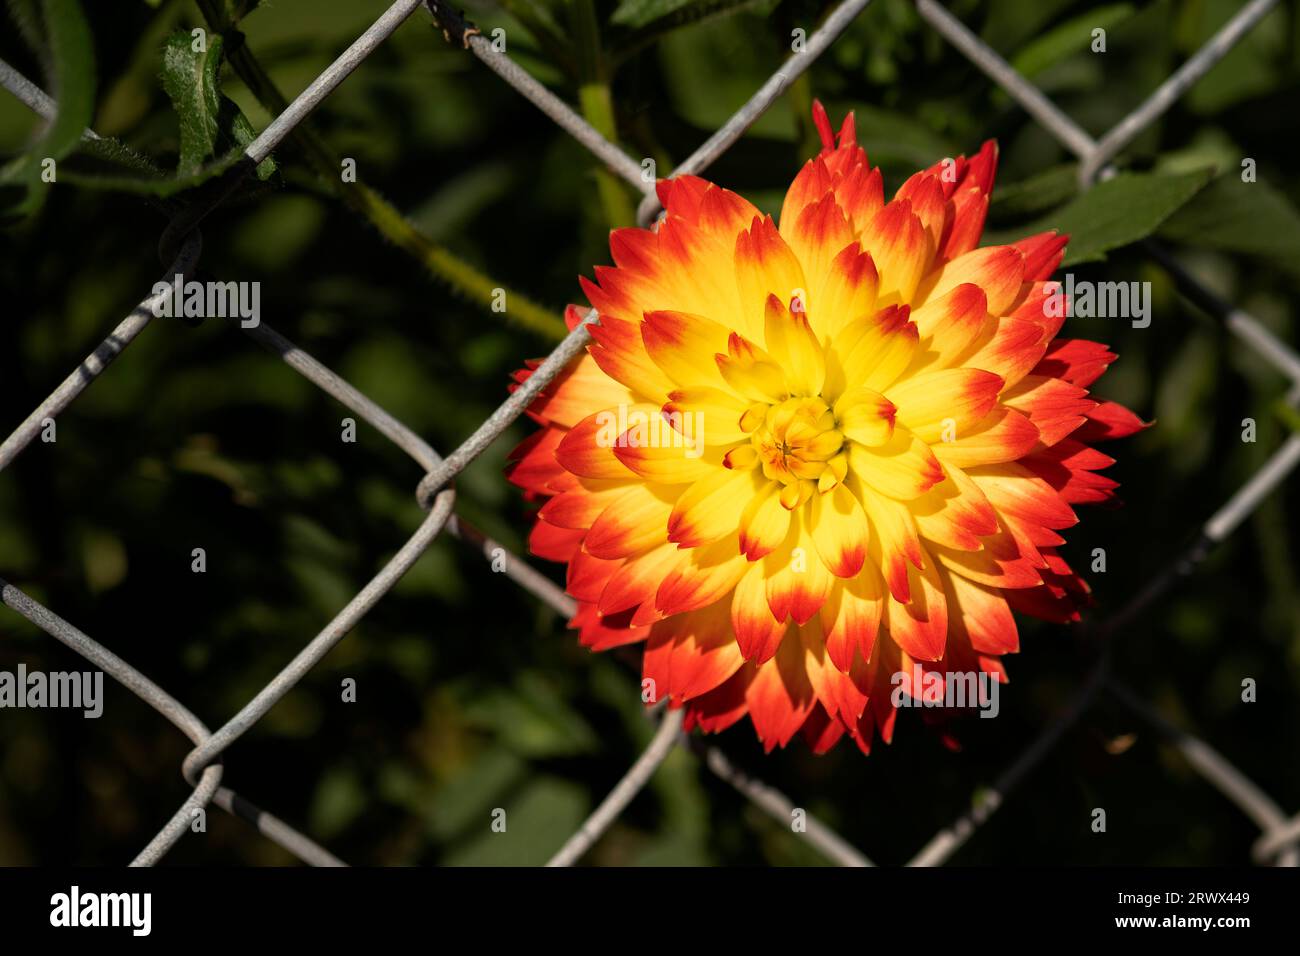 A close up image of a purple single Dahlia flower.The plant is in bloom during a late British summer. The flower is shot against a plain background Stock Photo